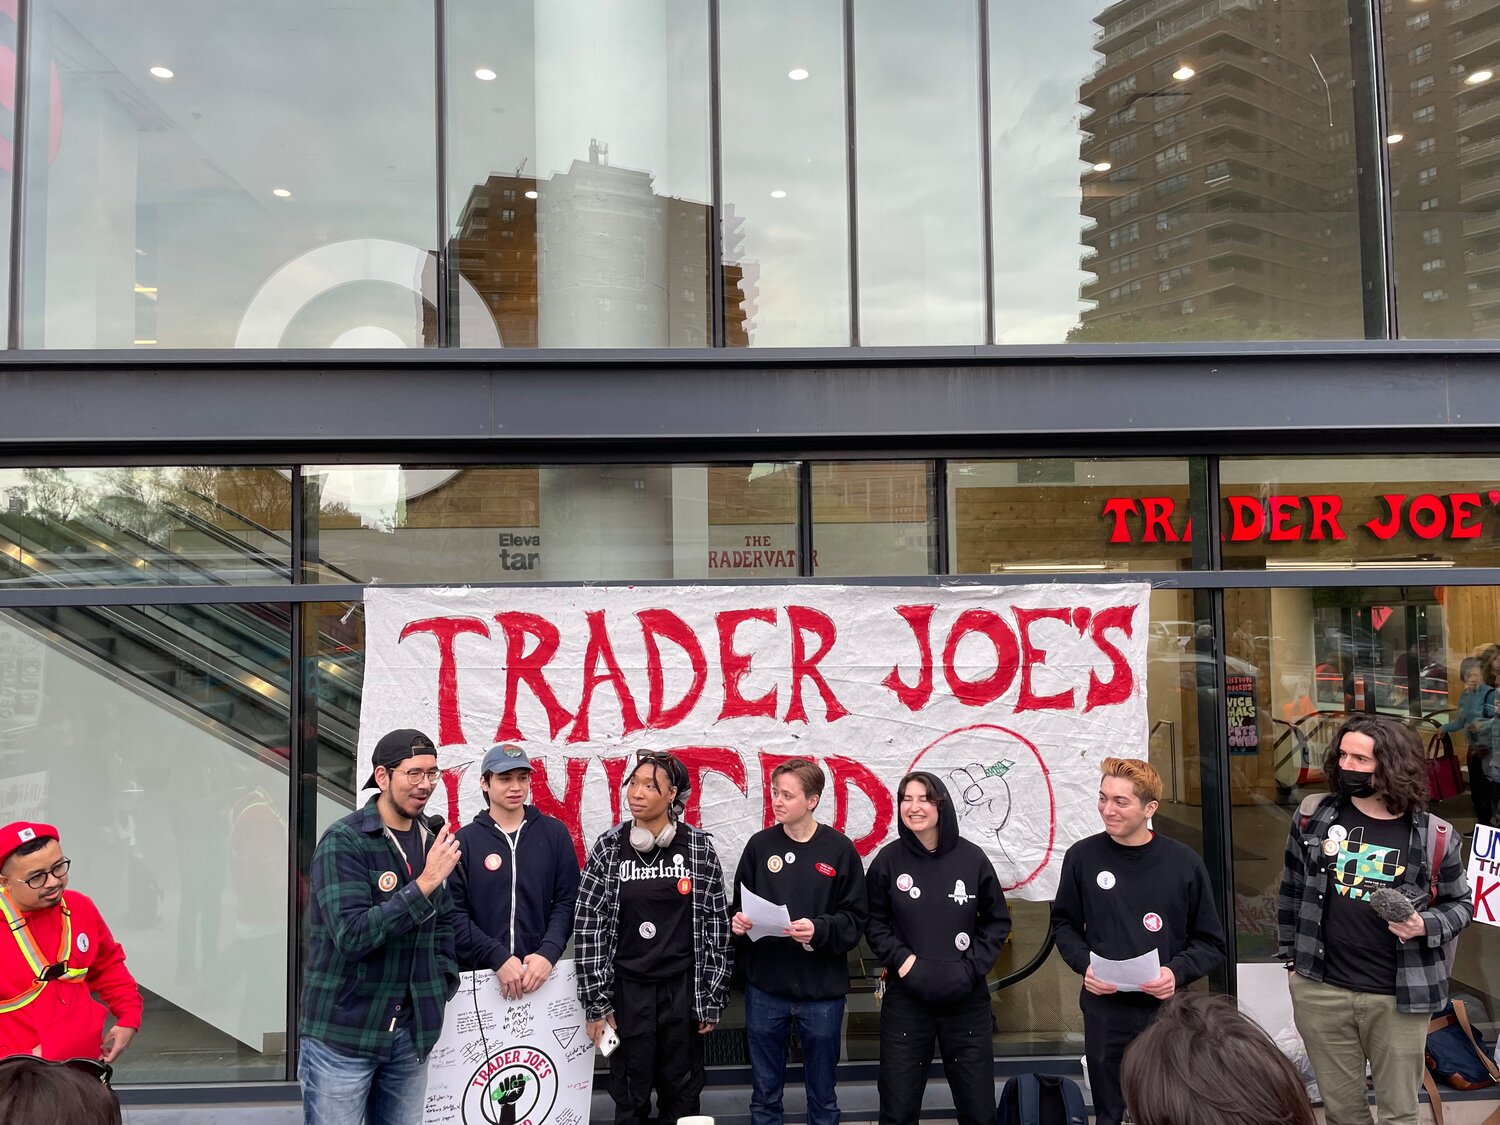 Trader Joe's workers rallied outside their Essex Crossing location April 18 ahead of a unionizing vote at the Lower East Side store. The 76-76 tally meant a loss for the union, the third failed effort by Trader Joe’s workers in the city in the last few months.